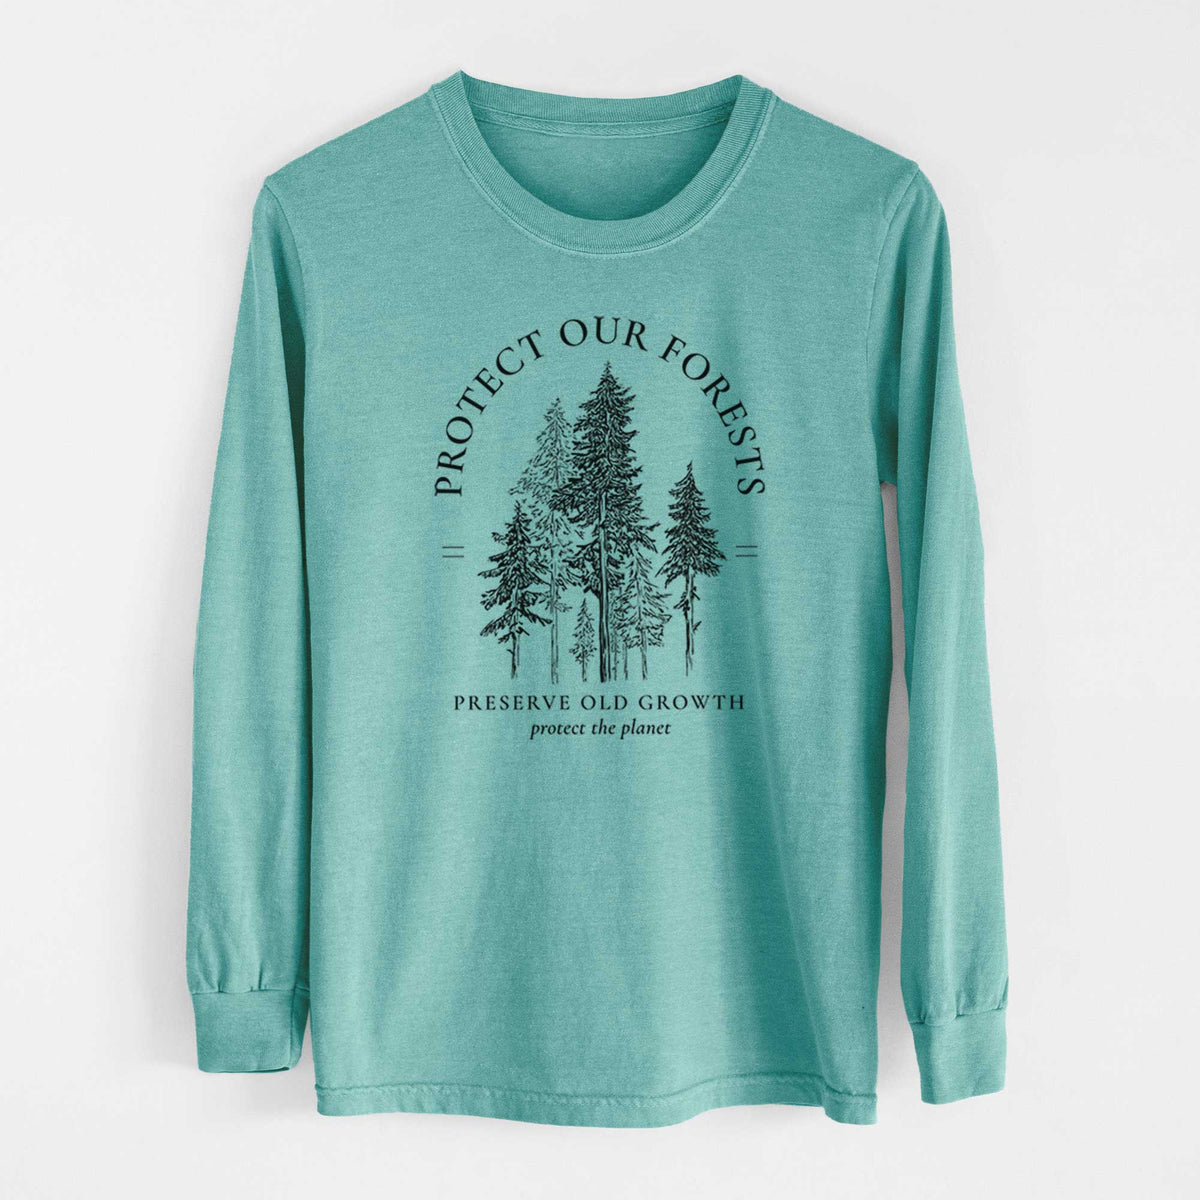 Protect our Forests - Preserve Old Growth - Heavyweight 100% Cotton Long Sleeve